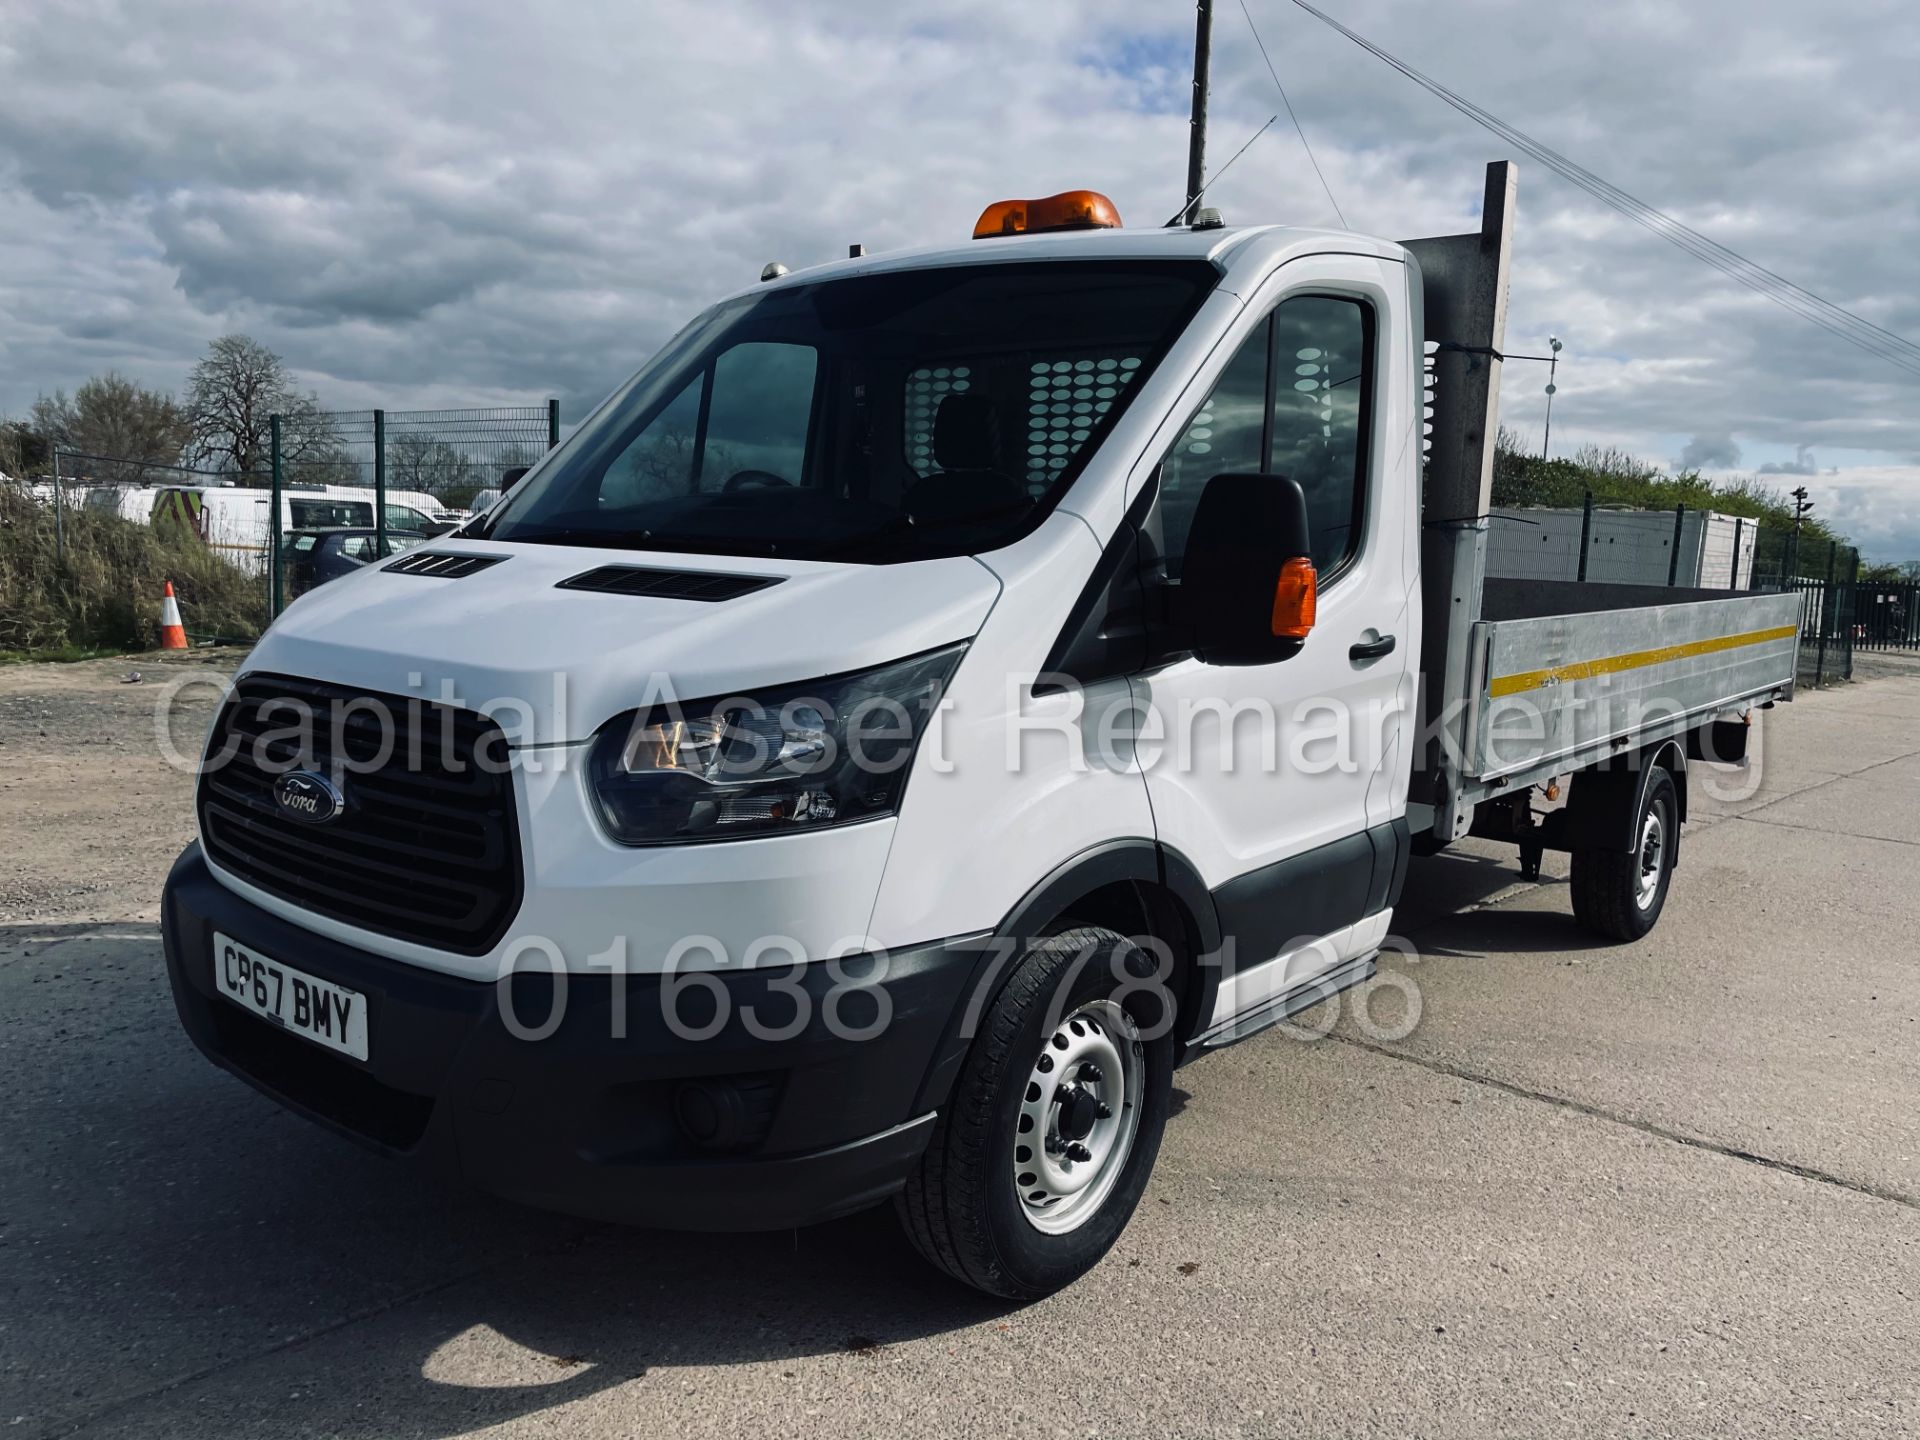 ON SALE FORD TRANSIT 130 T350 *LWB - ALLOY DROPSIDE * (2018 MODEL - EURO 6) '130 BHP - ' (1 OWNER) - Image 5 of 41